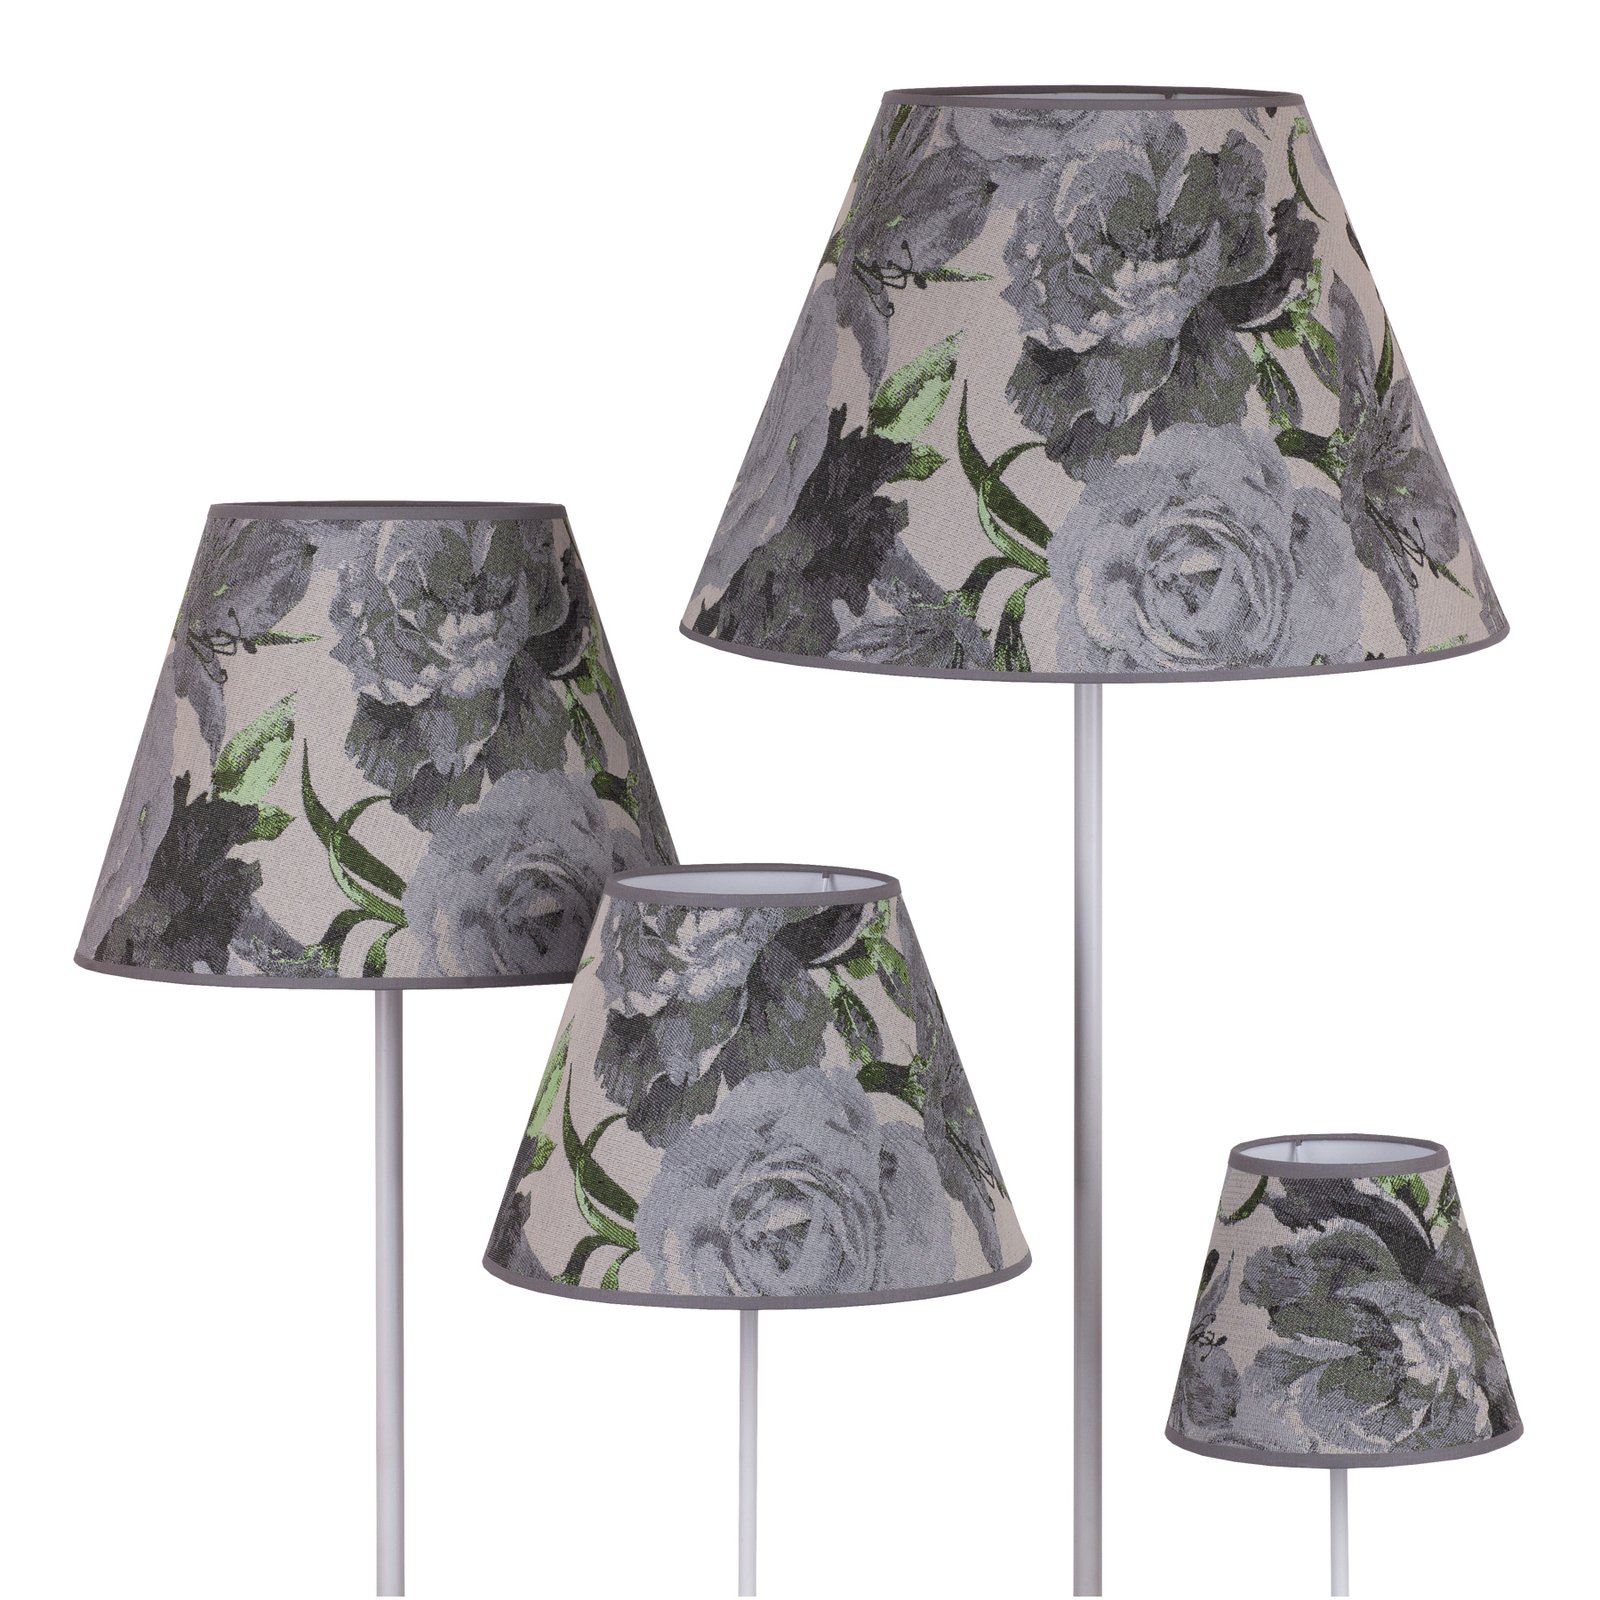 Sofia lampshade height 21 cm, floral pattern grey